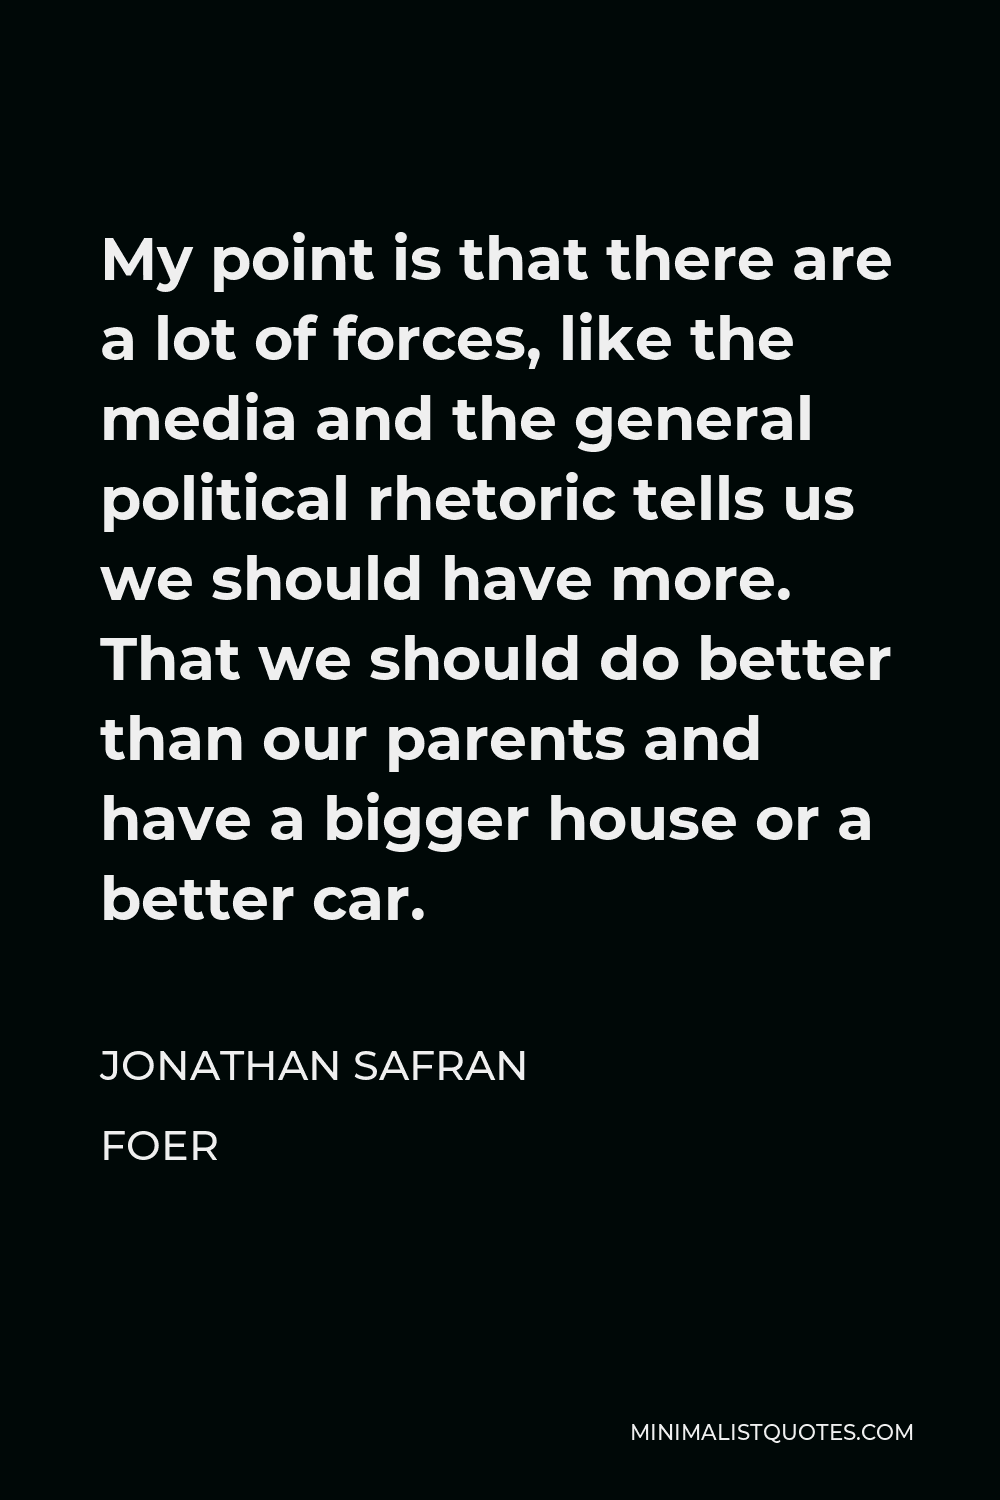 Jonathan Safran Foer Quote - My point is that there are a lot of forces, like the media and the general political rhetoric tells us we should have more. That we should do better than our parents and have a bigger house or a better car.